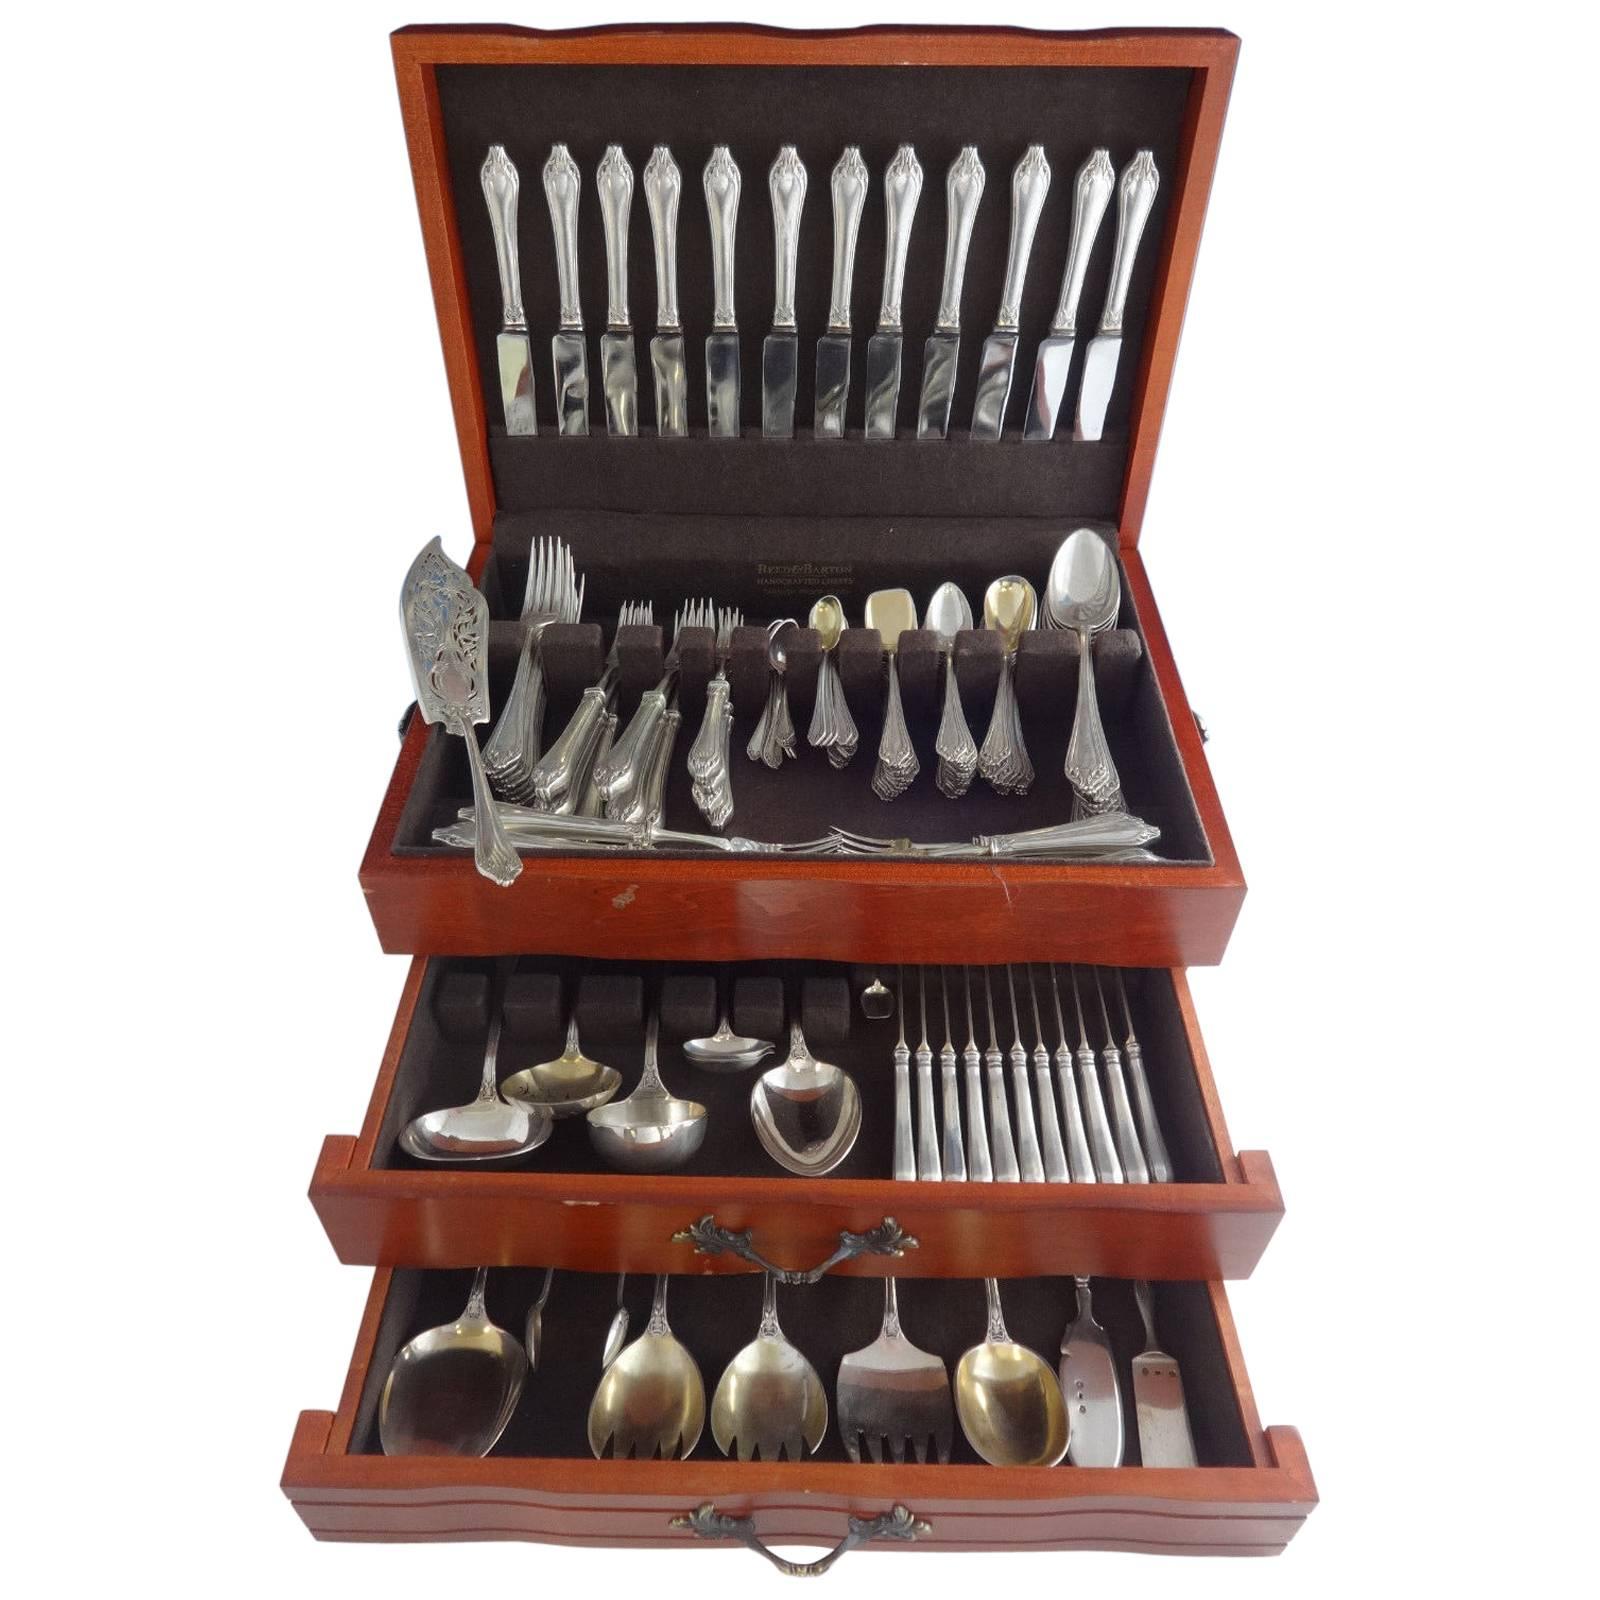 Beautiful vintage Austrian 800 silver flatware set, massive 146 pieces including many unusual place pieces & servers.

This set includes:

• 12 knives, 9